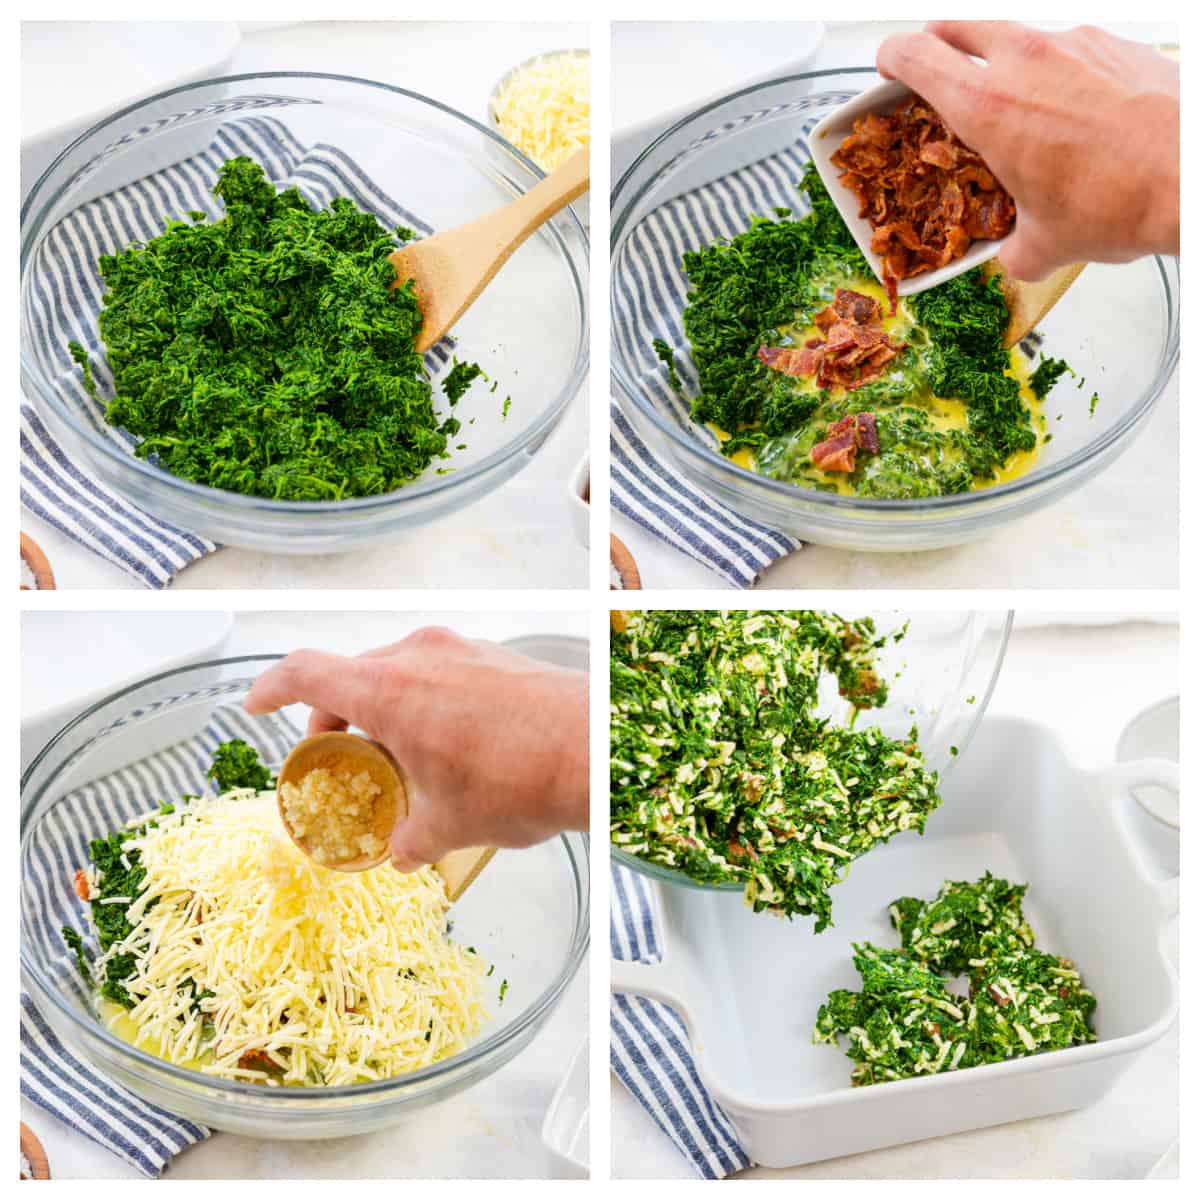 Collage showing how to make spinach casserole.